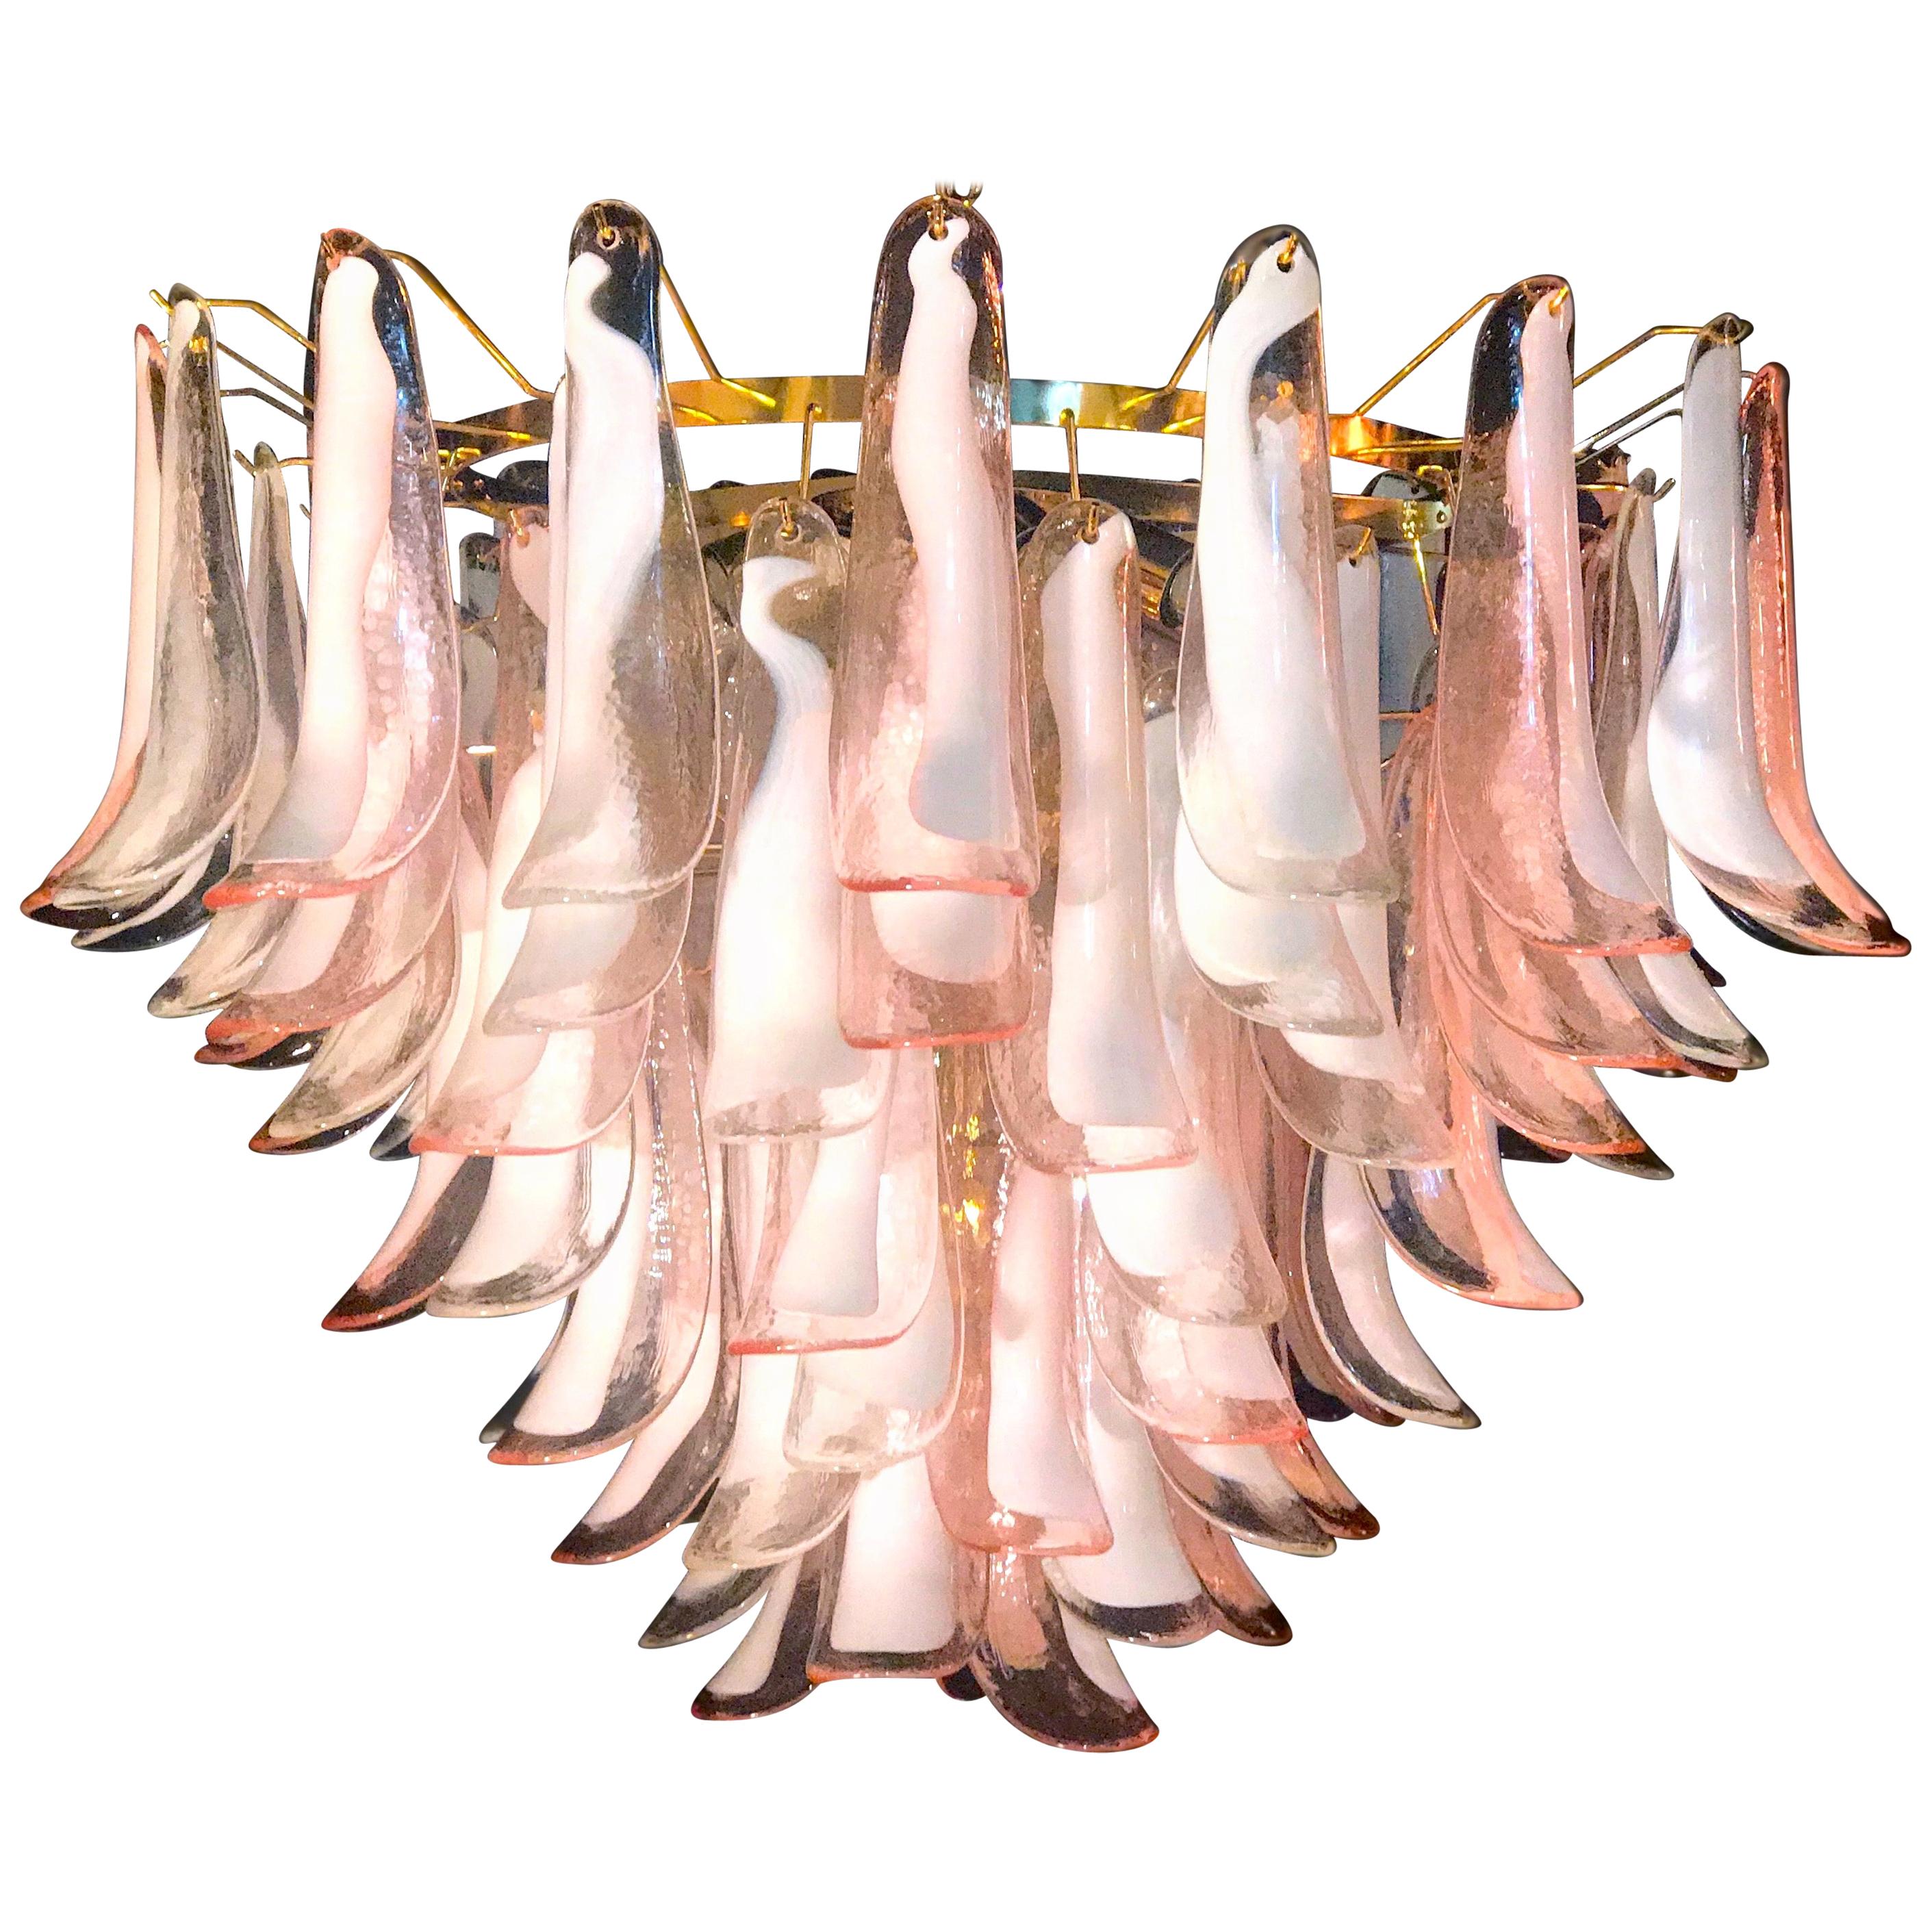 Fabulous Italian chandelier made by 90 pink and white lattimo Murano glass petals supported by a brass frame by Galleria Veneziani.
We can customize the frame, brass or chrome. 

Dimensions: 51.20 inches (130 cm) height with chain, 28 inches (70